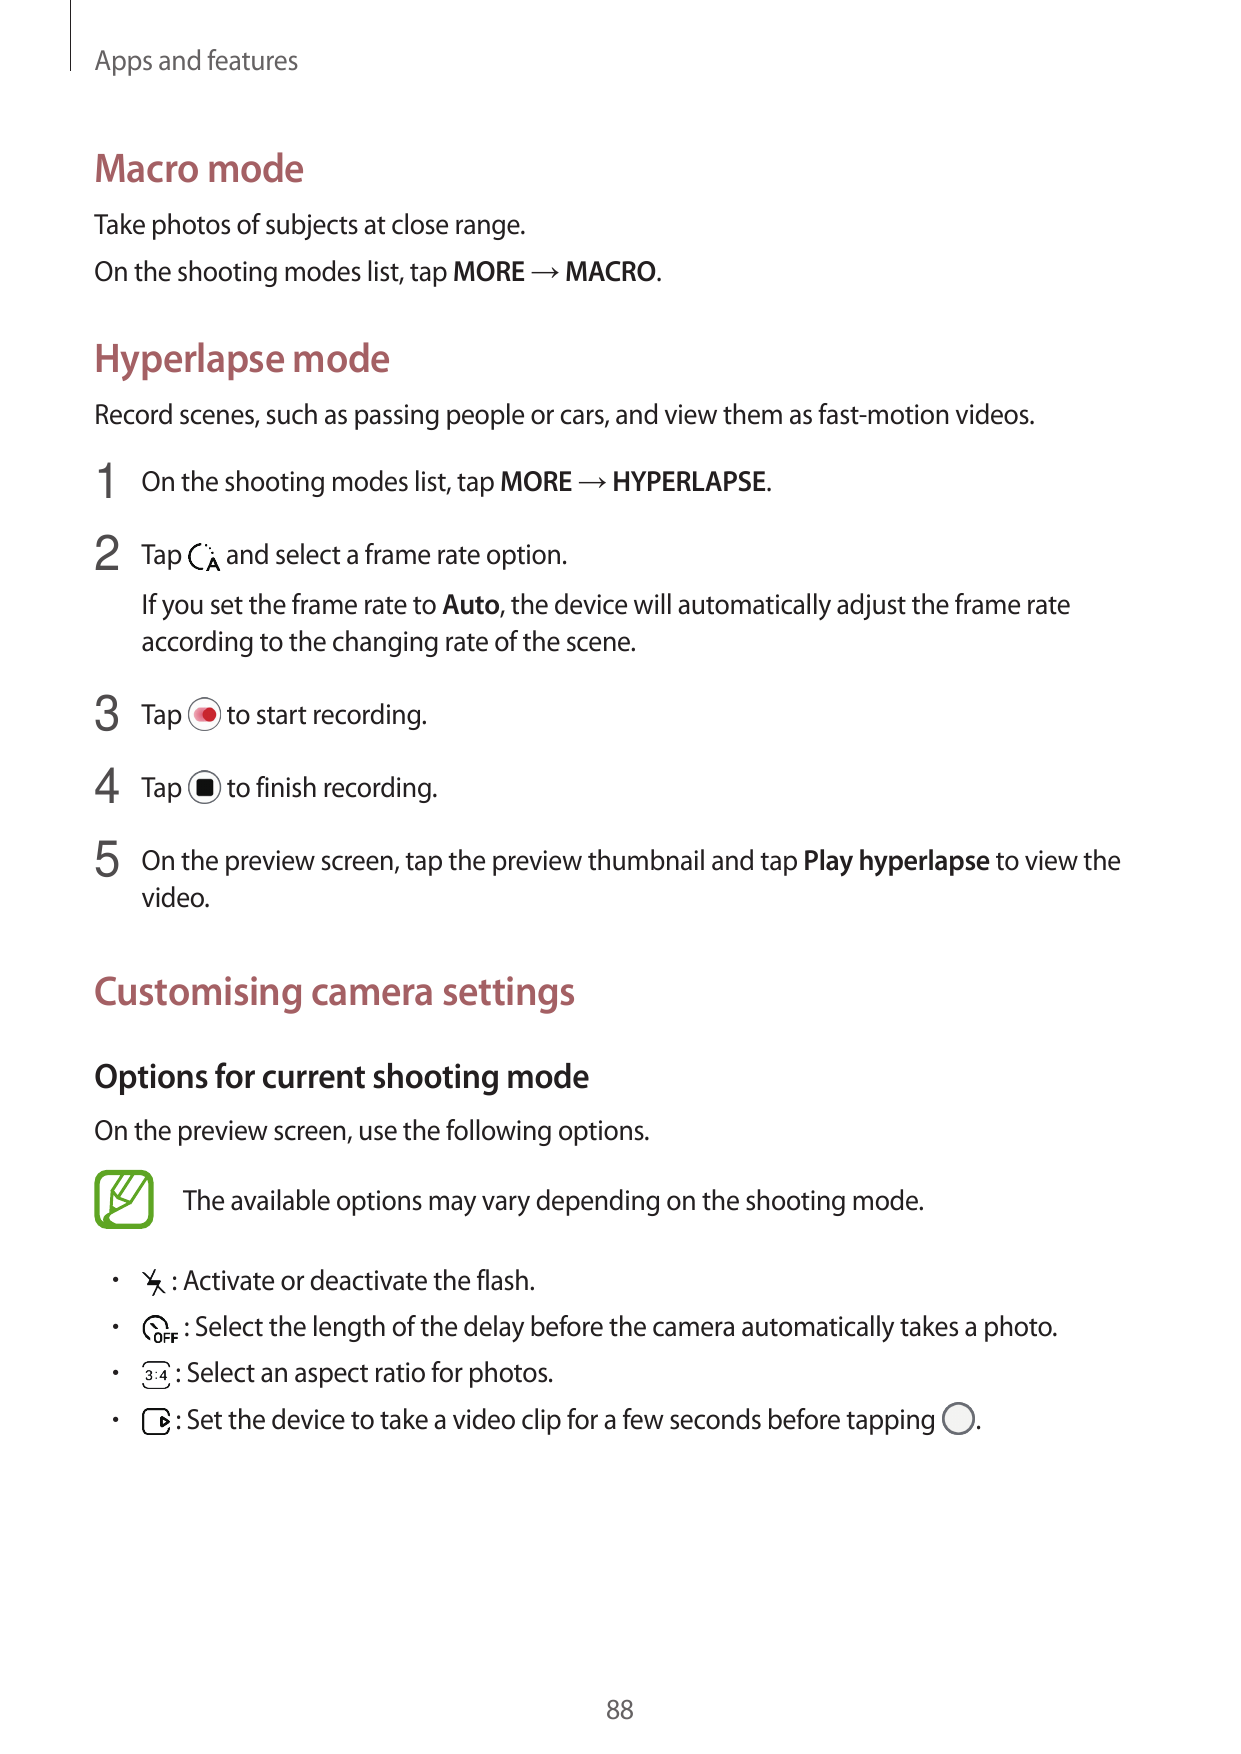 Apps and featuresMacro modeTake photos of subjects at close range.On the shooting modes list, tap MORE → MACRO.Hyperlapse modeRe